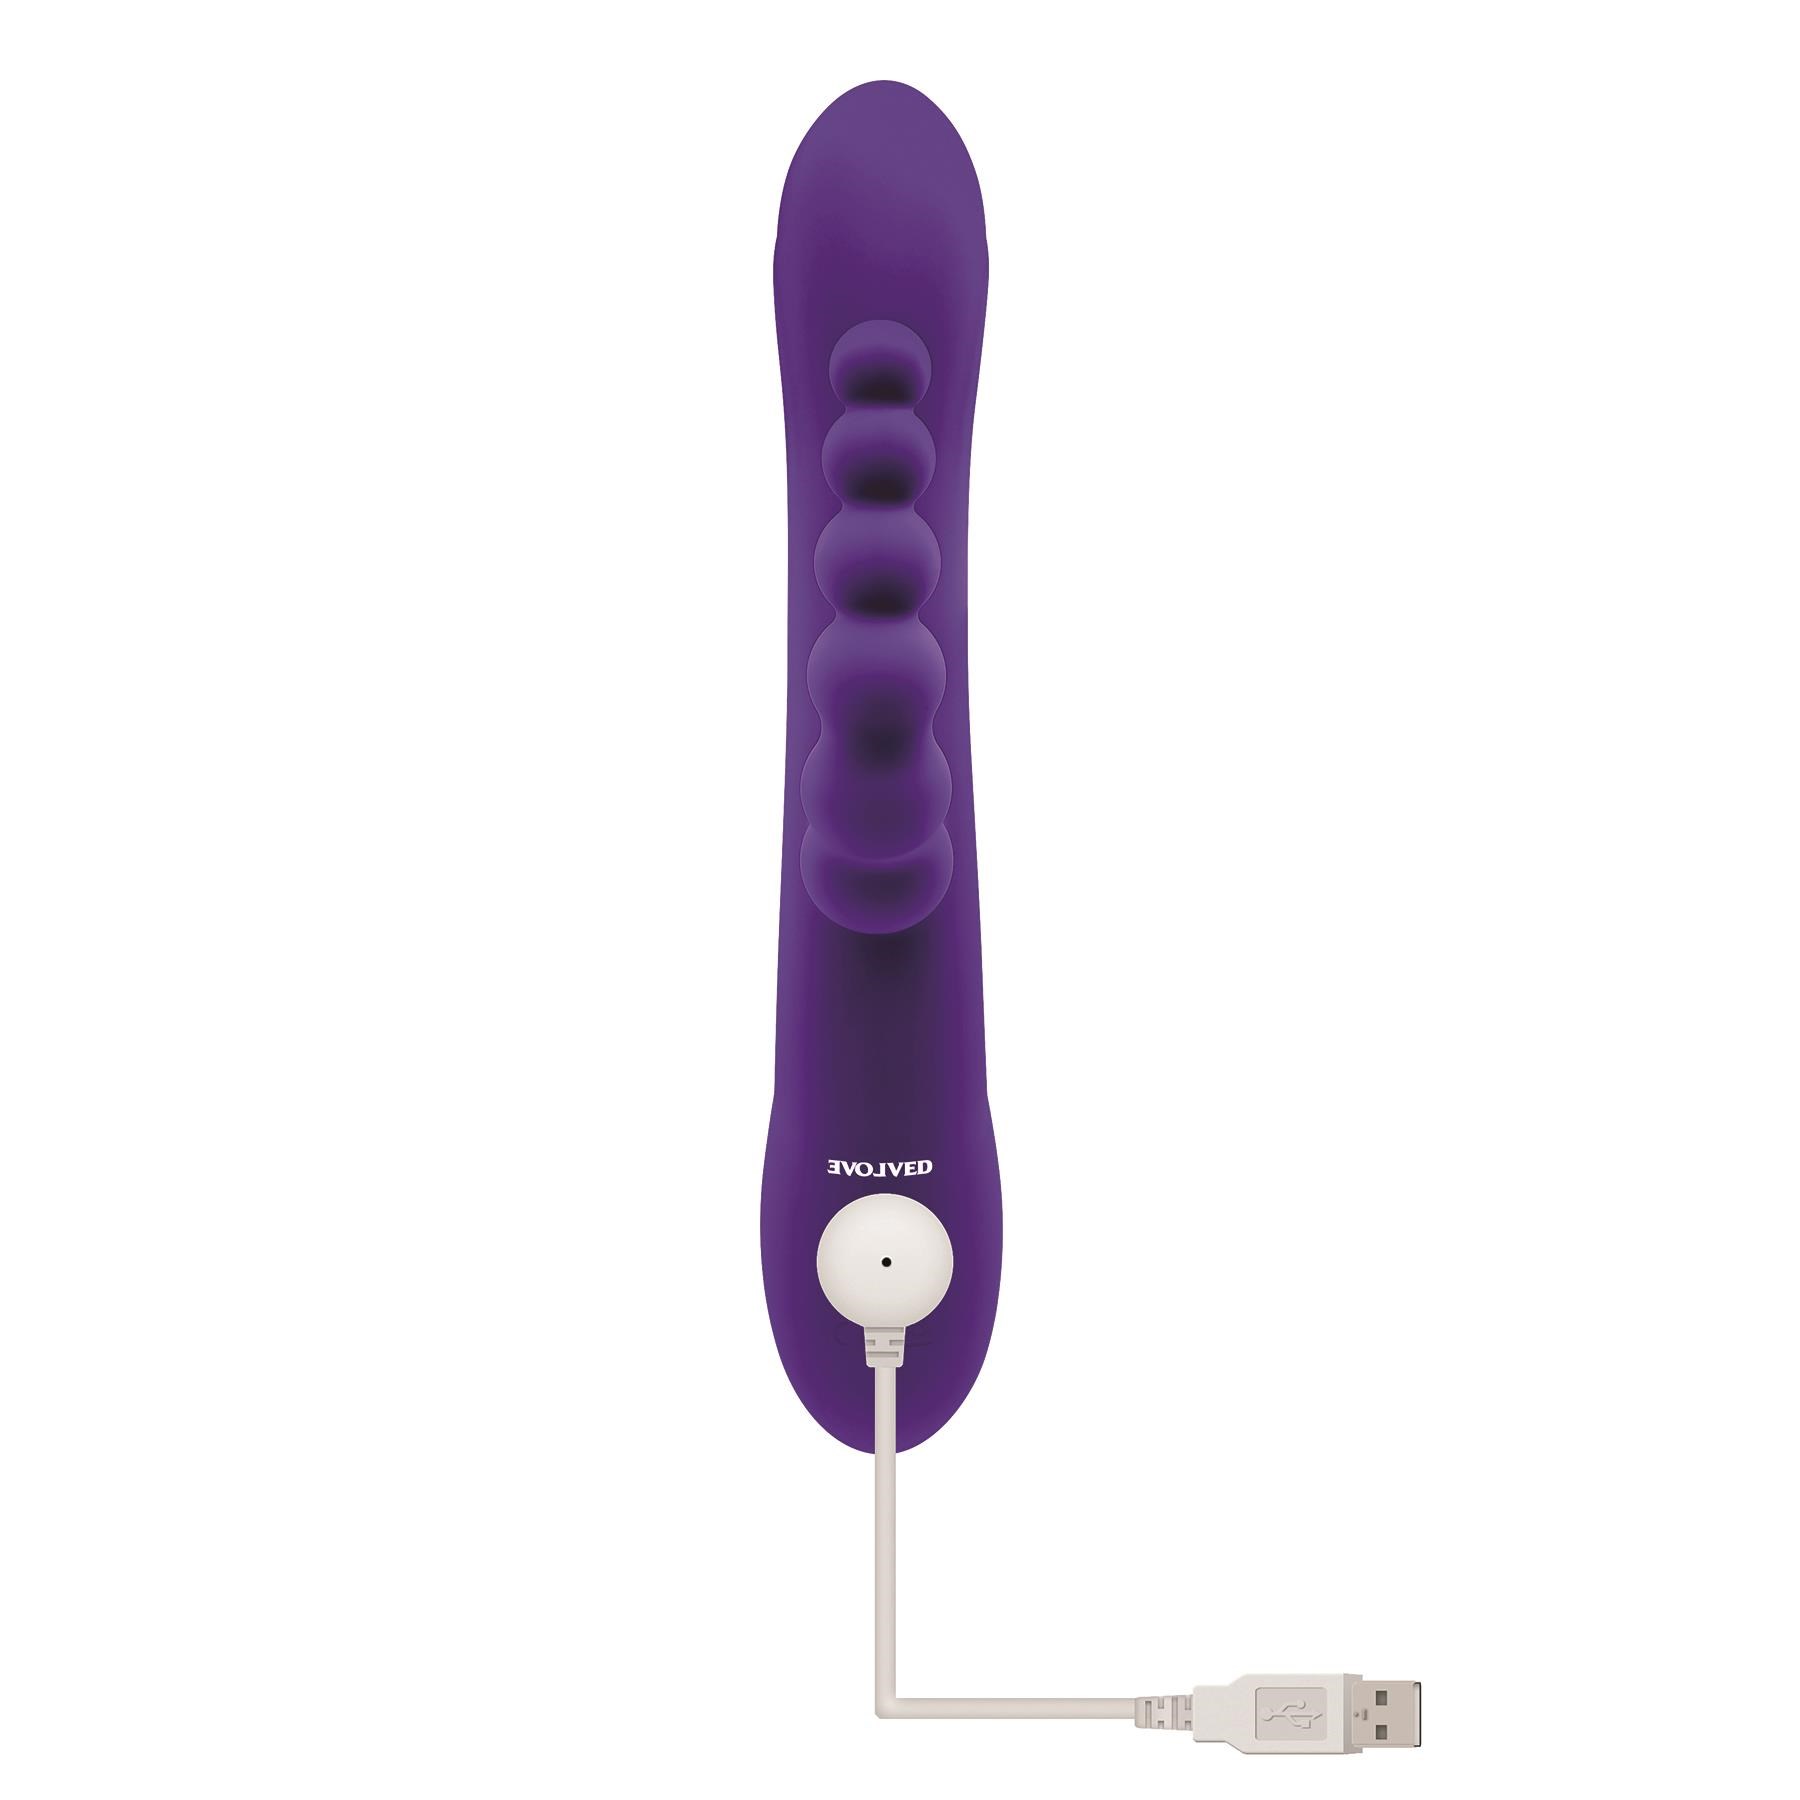 Lick Me Triple Simulating Vibrator - Showing Where Charging Cable is Placed